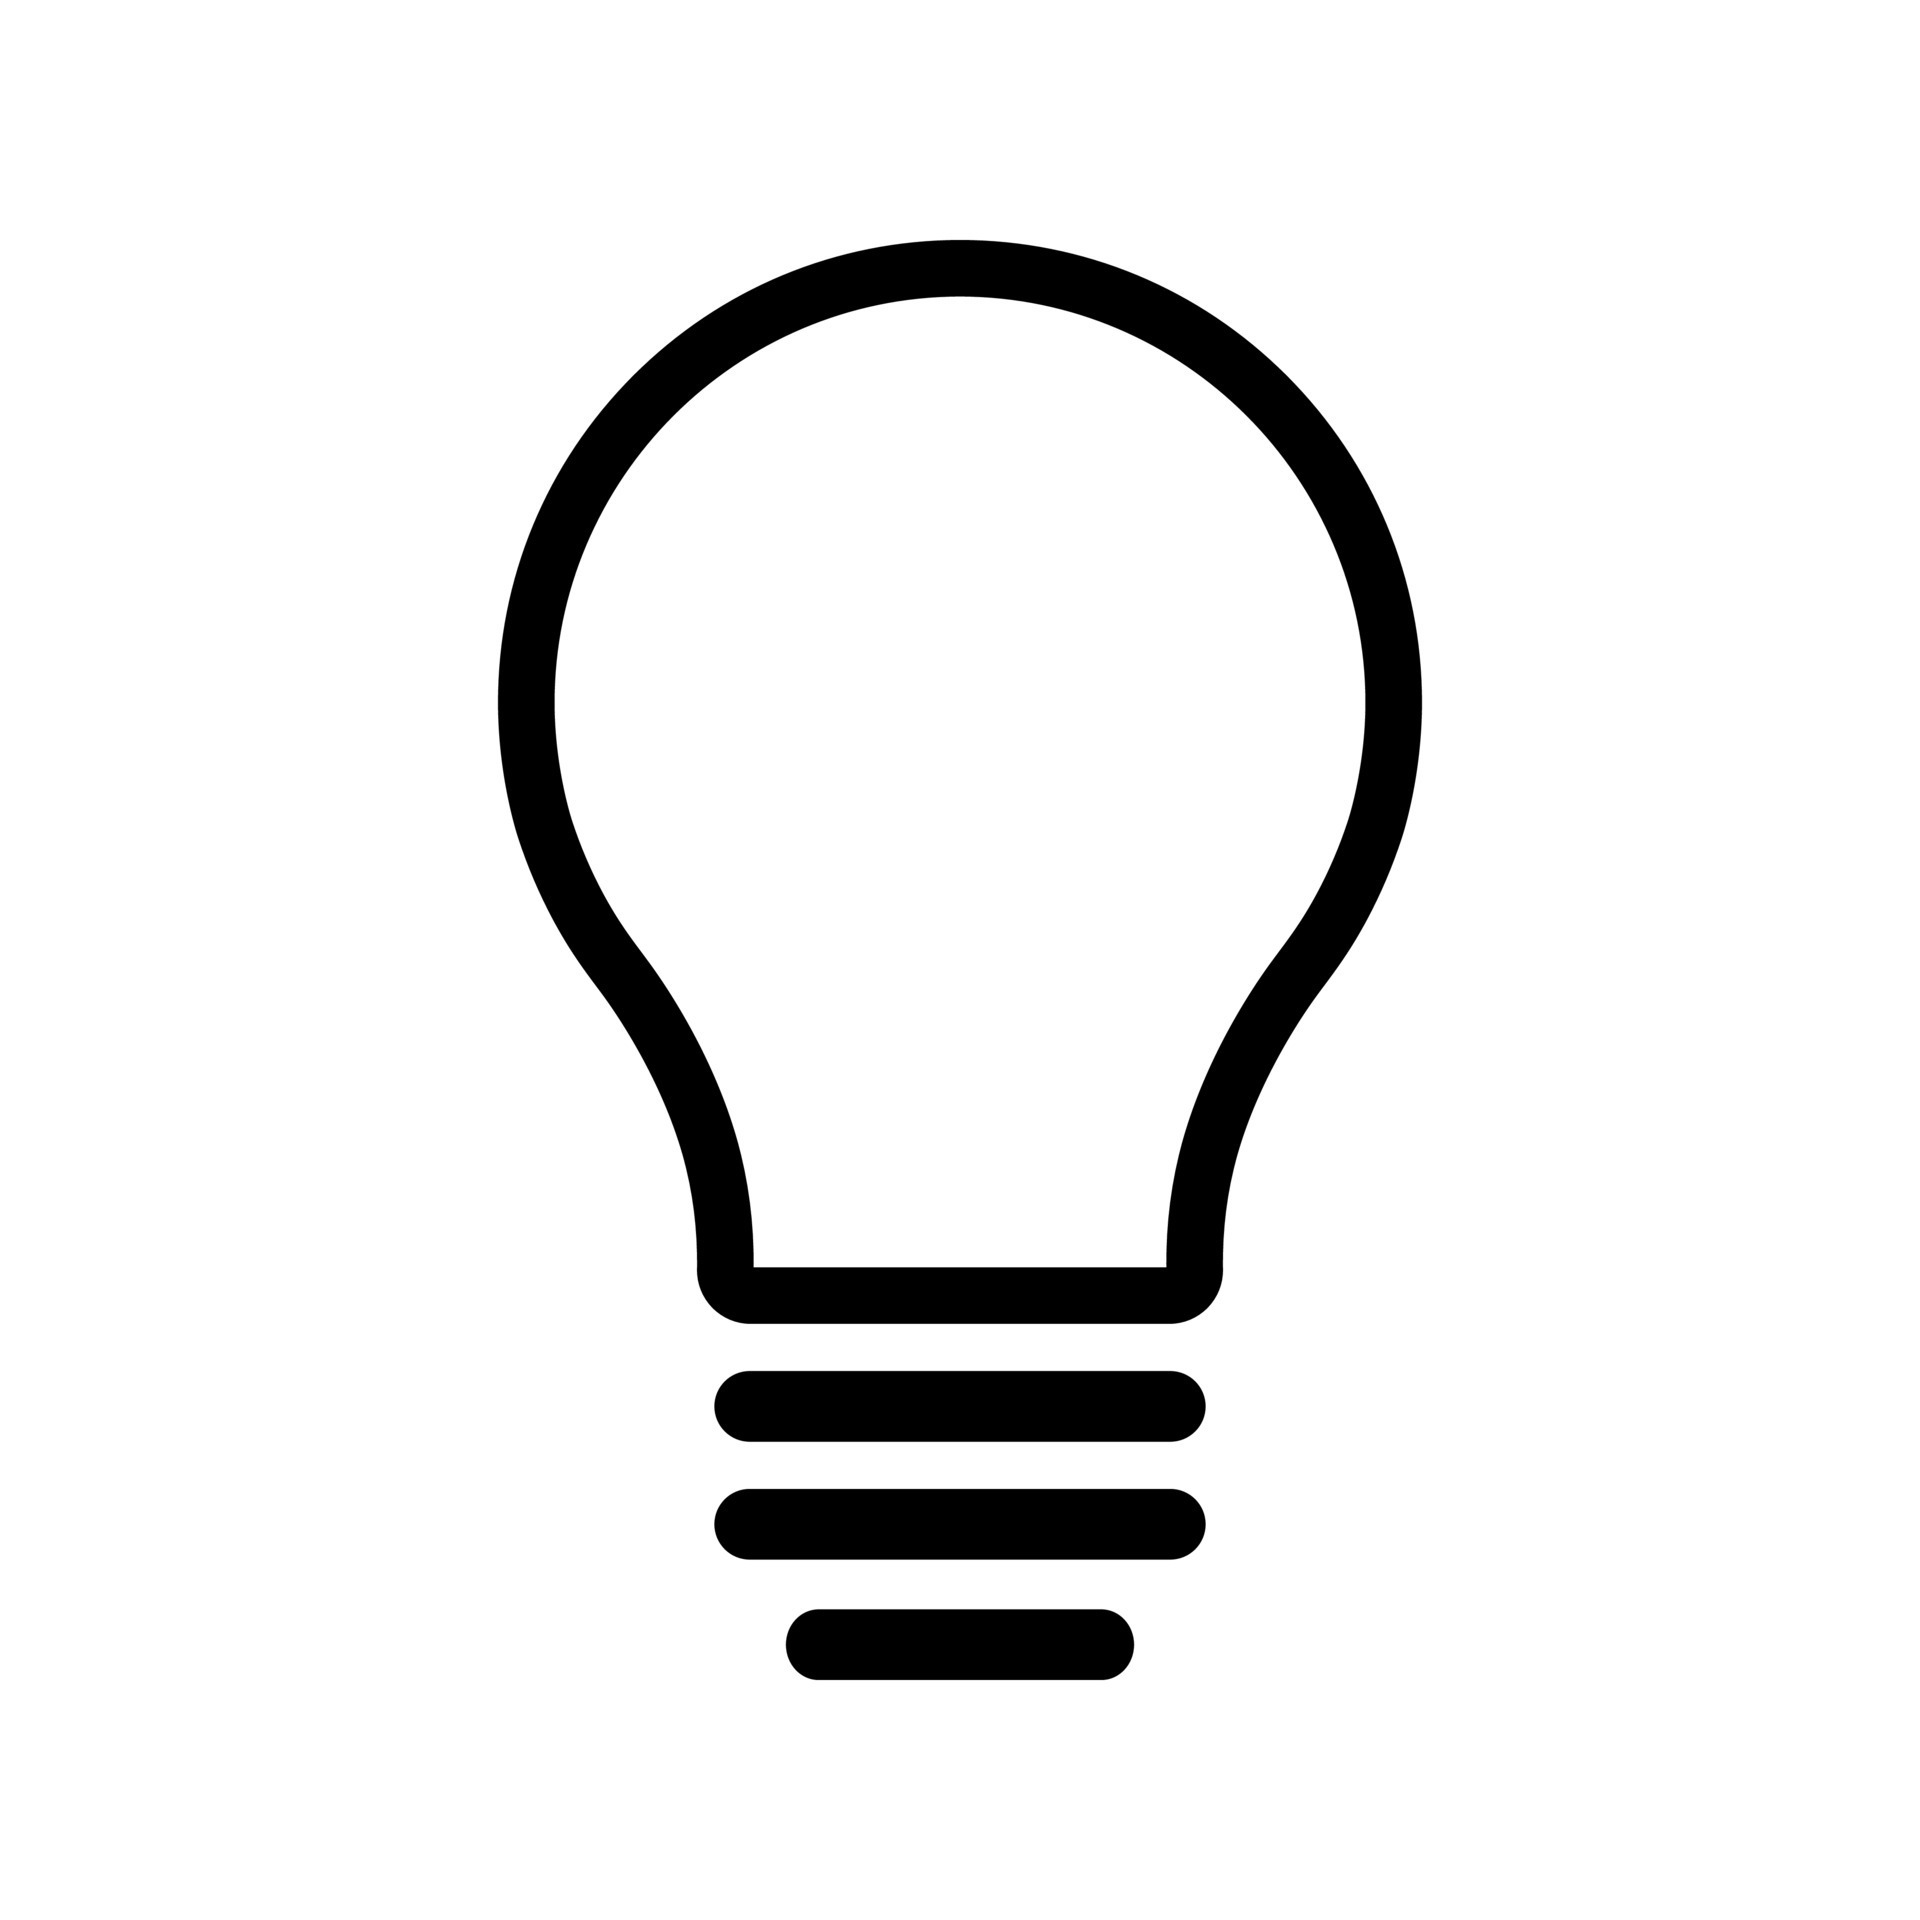 bulb or idea and inspiration simple icon Electric energy concept 19513308 Art at Vecteezy